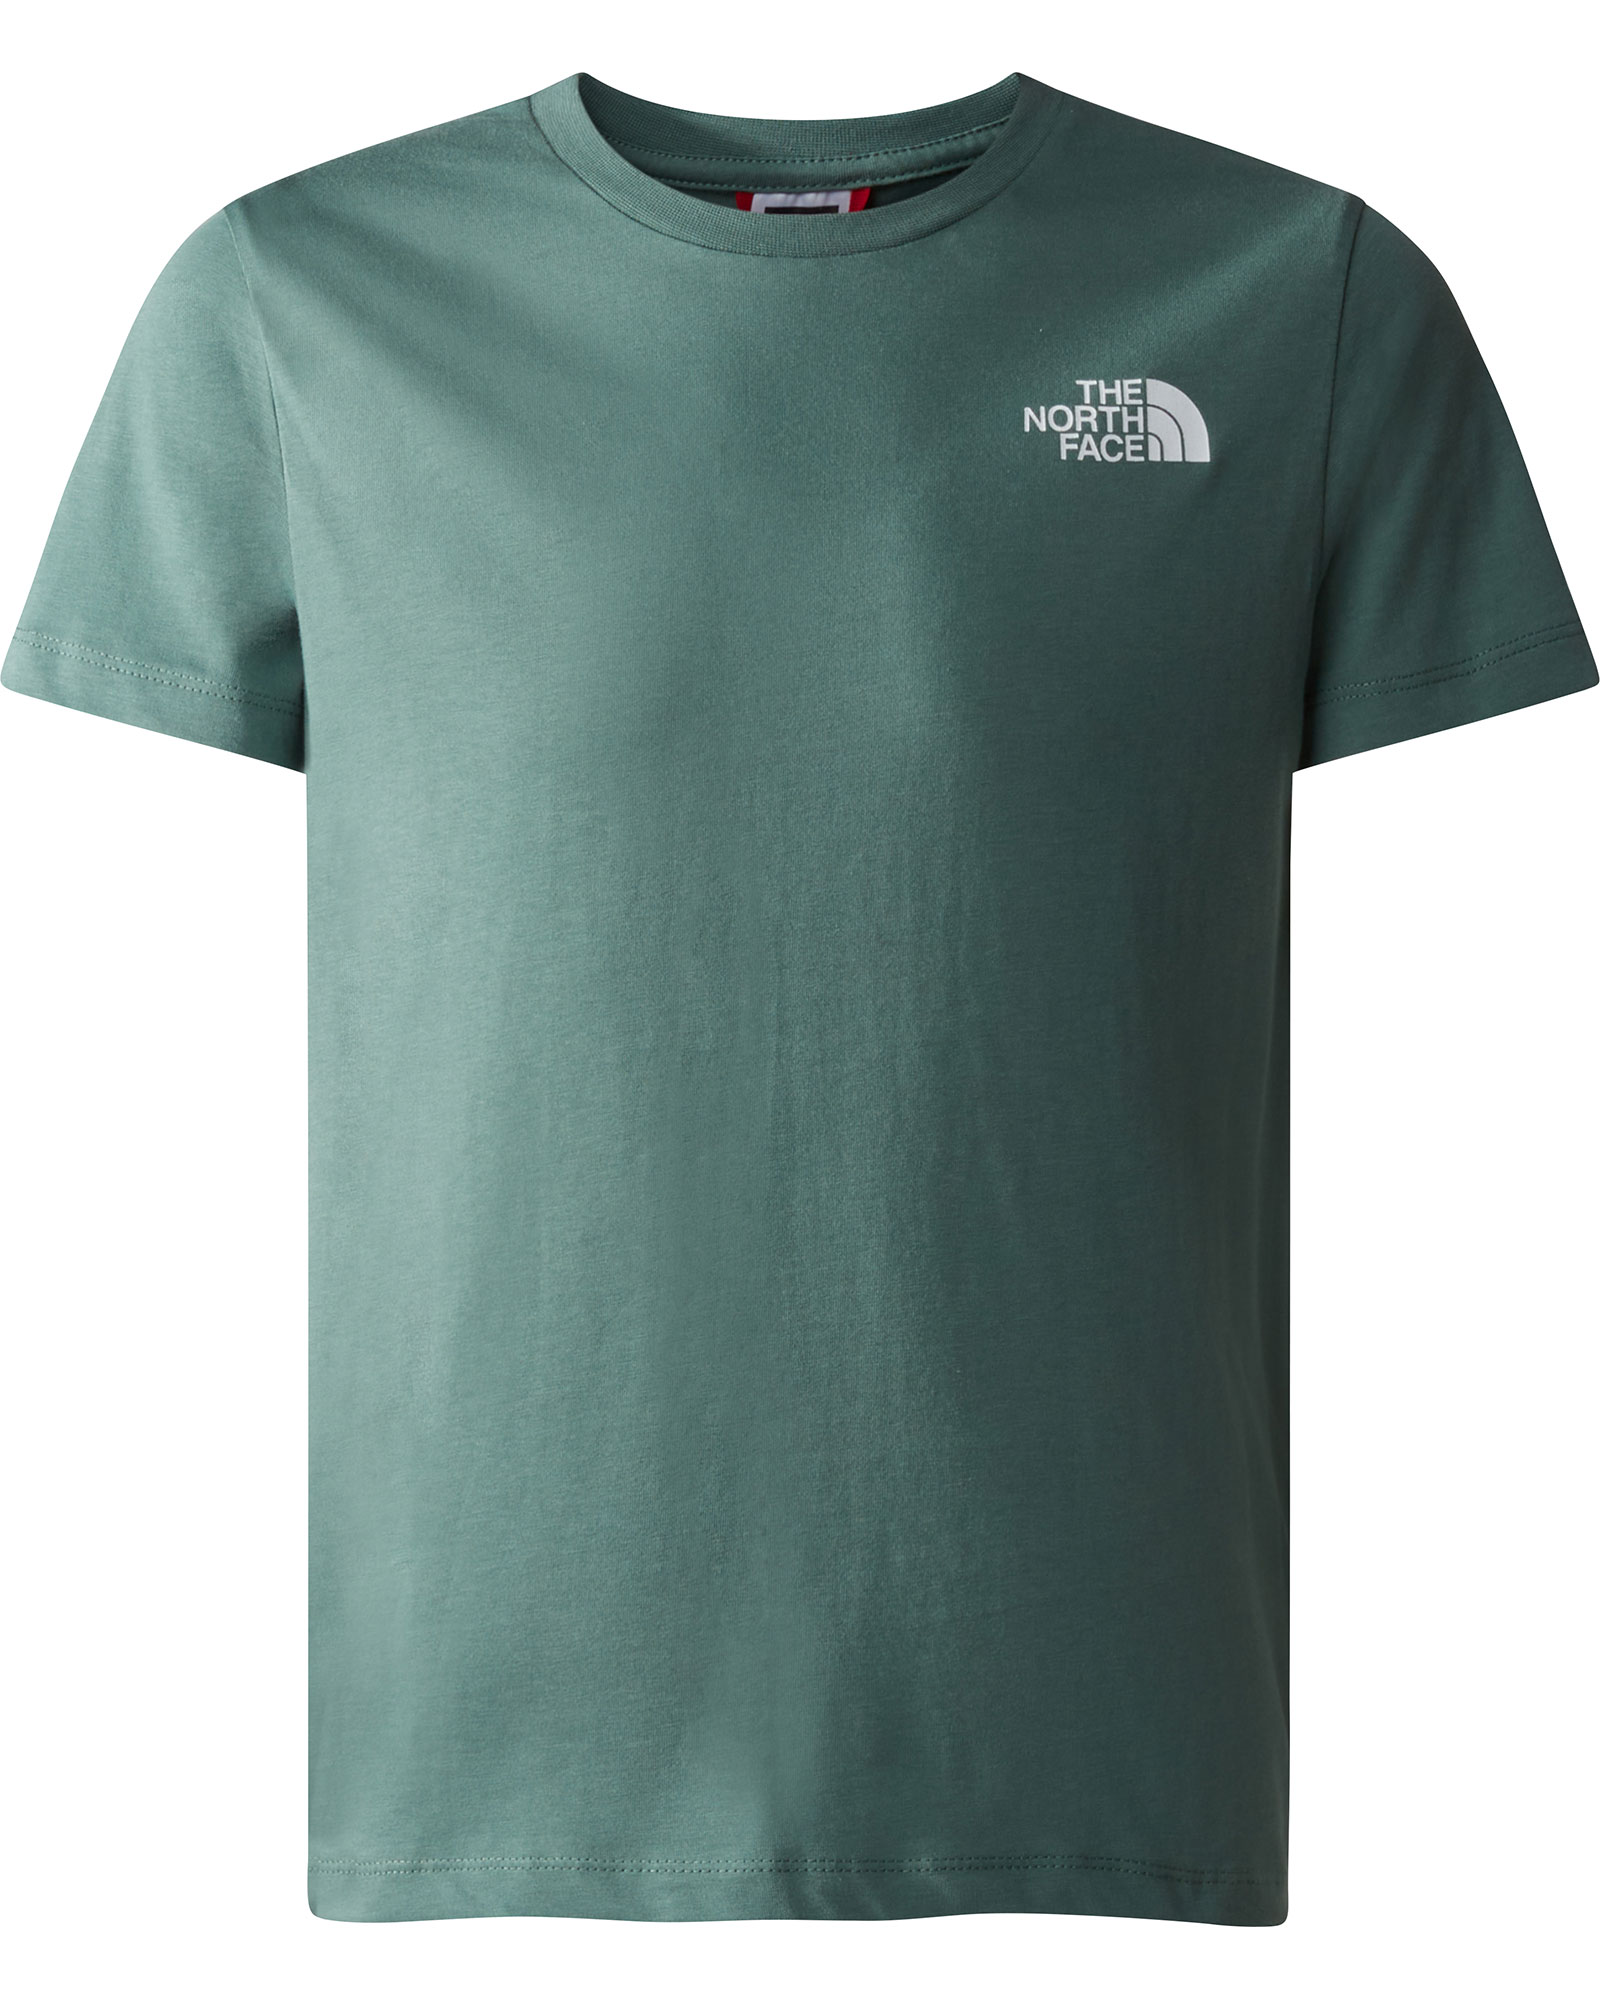 The North Face Youth Simple Dome T Shirt - Dark Sage M